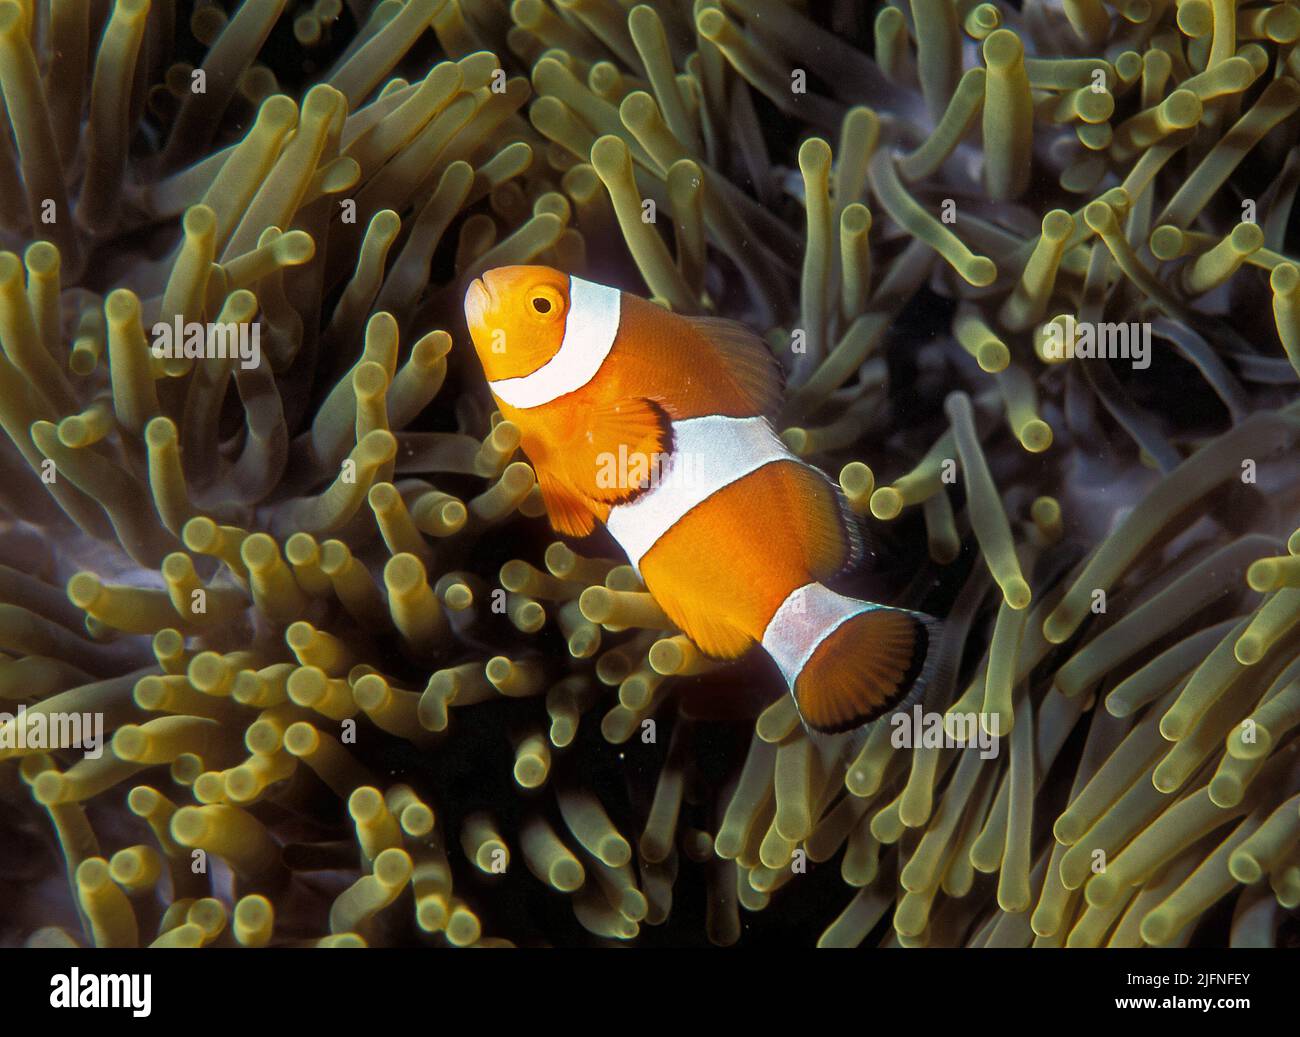 Ocellaris Clownfishes (Amphiprion ocellaris) among the tentacles of the host-sea anemone Heteractis crispa in a coral reef in southern Thailand. Stock Photo